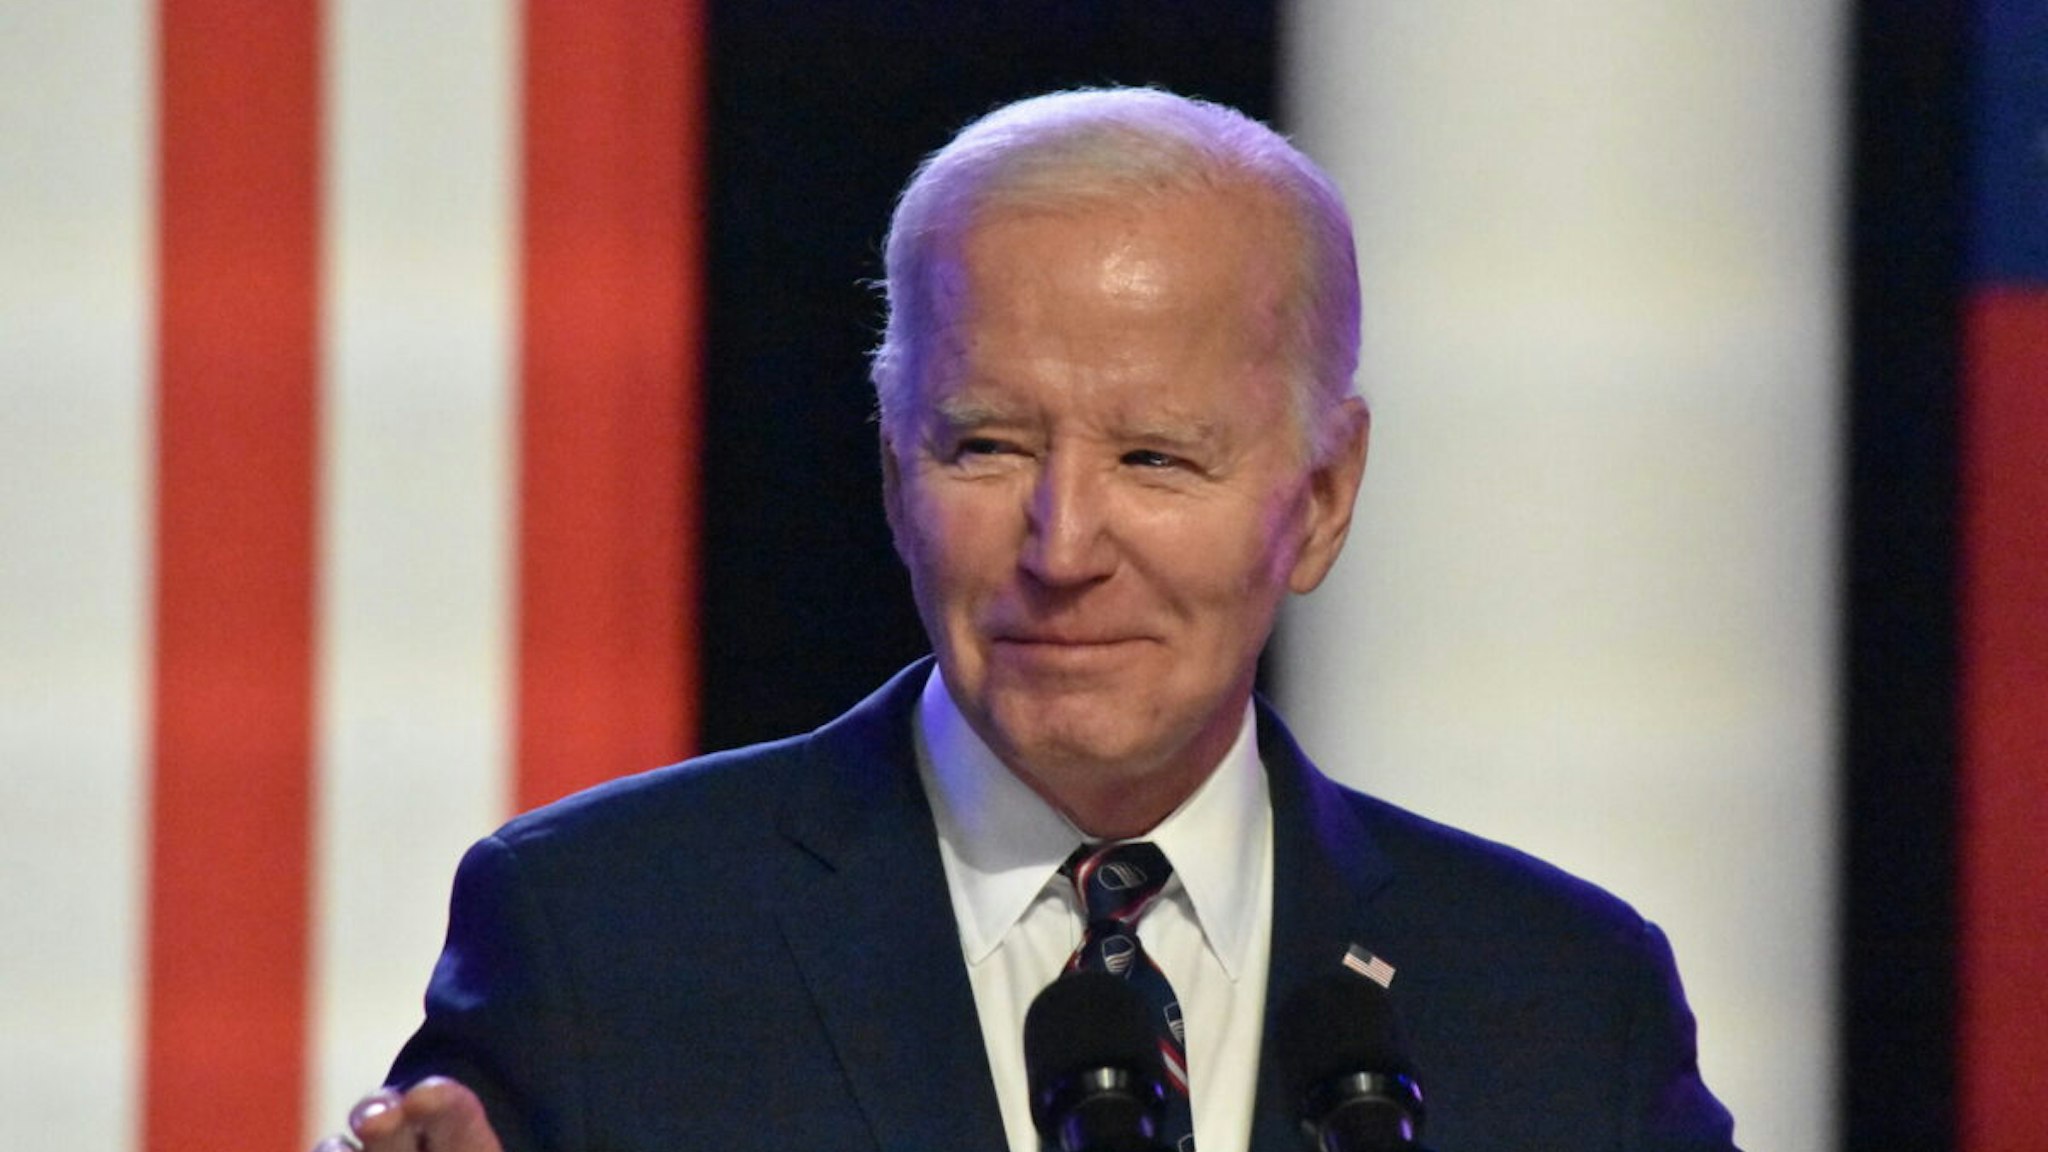 US President Joe Biden speaks at Montgomery County Community College in Blue Bell, Pennsylvania, on January 5, 2024. Biden's speech comes ahead of the third anniversary of the assault on the US Capitol.